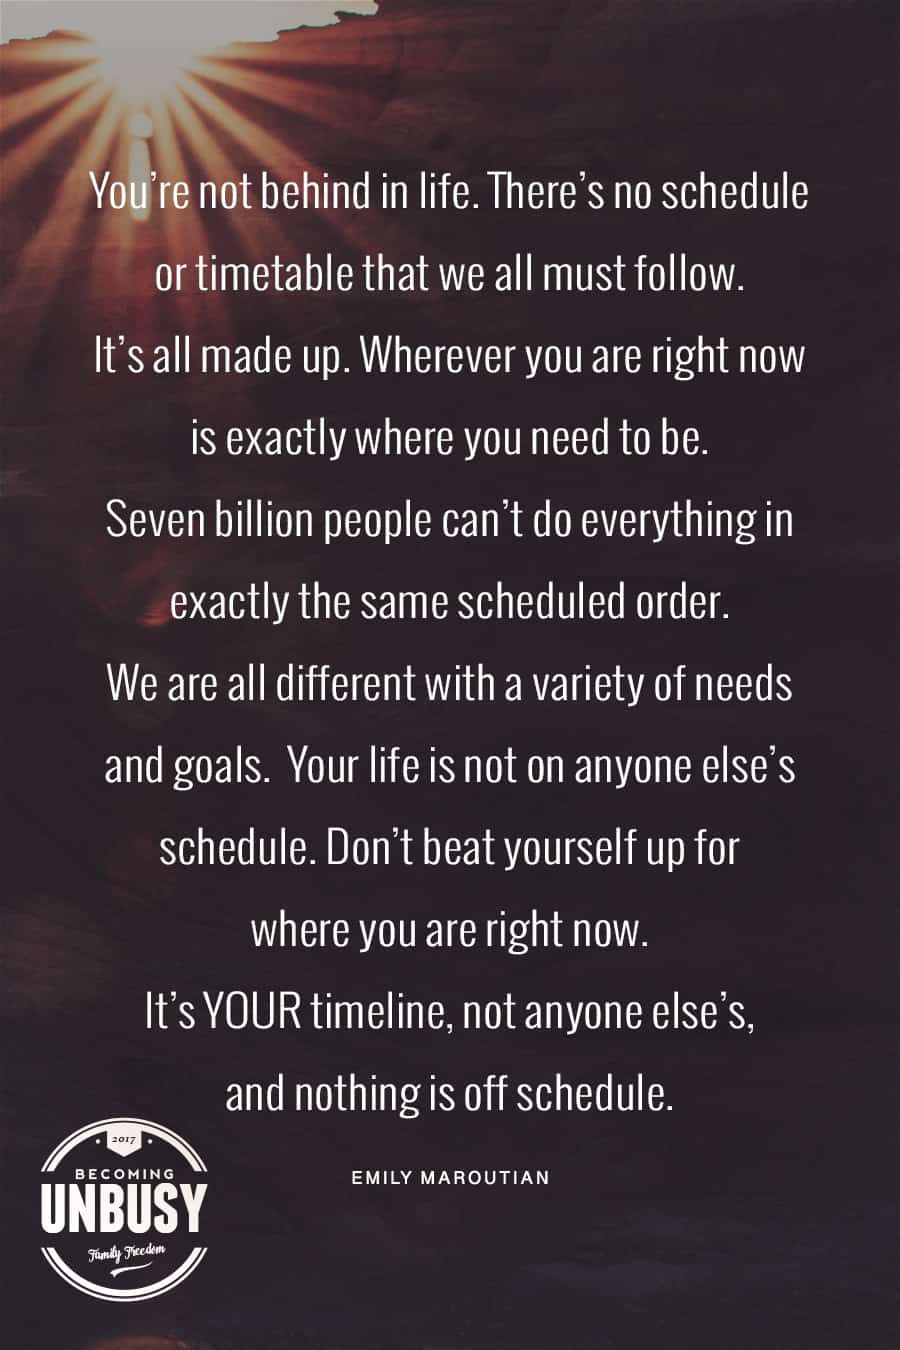 You are not behind in life. There's no schedule or timetable that we all must follow. It's all made up. #quote *Love this quote and this entire post.